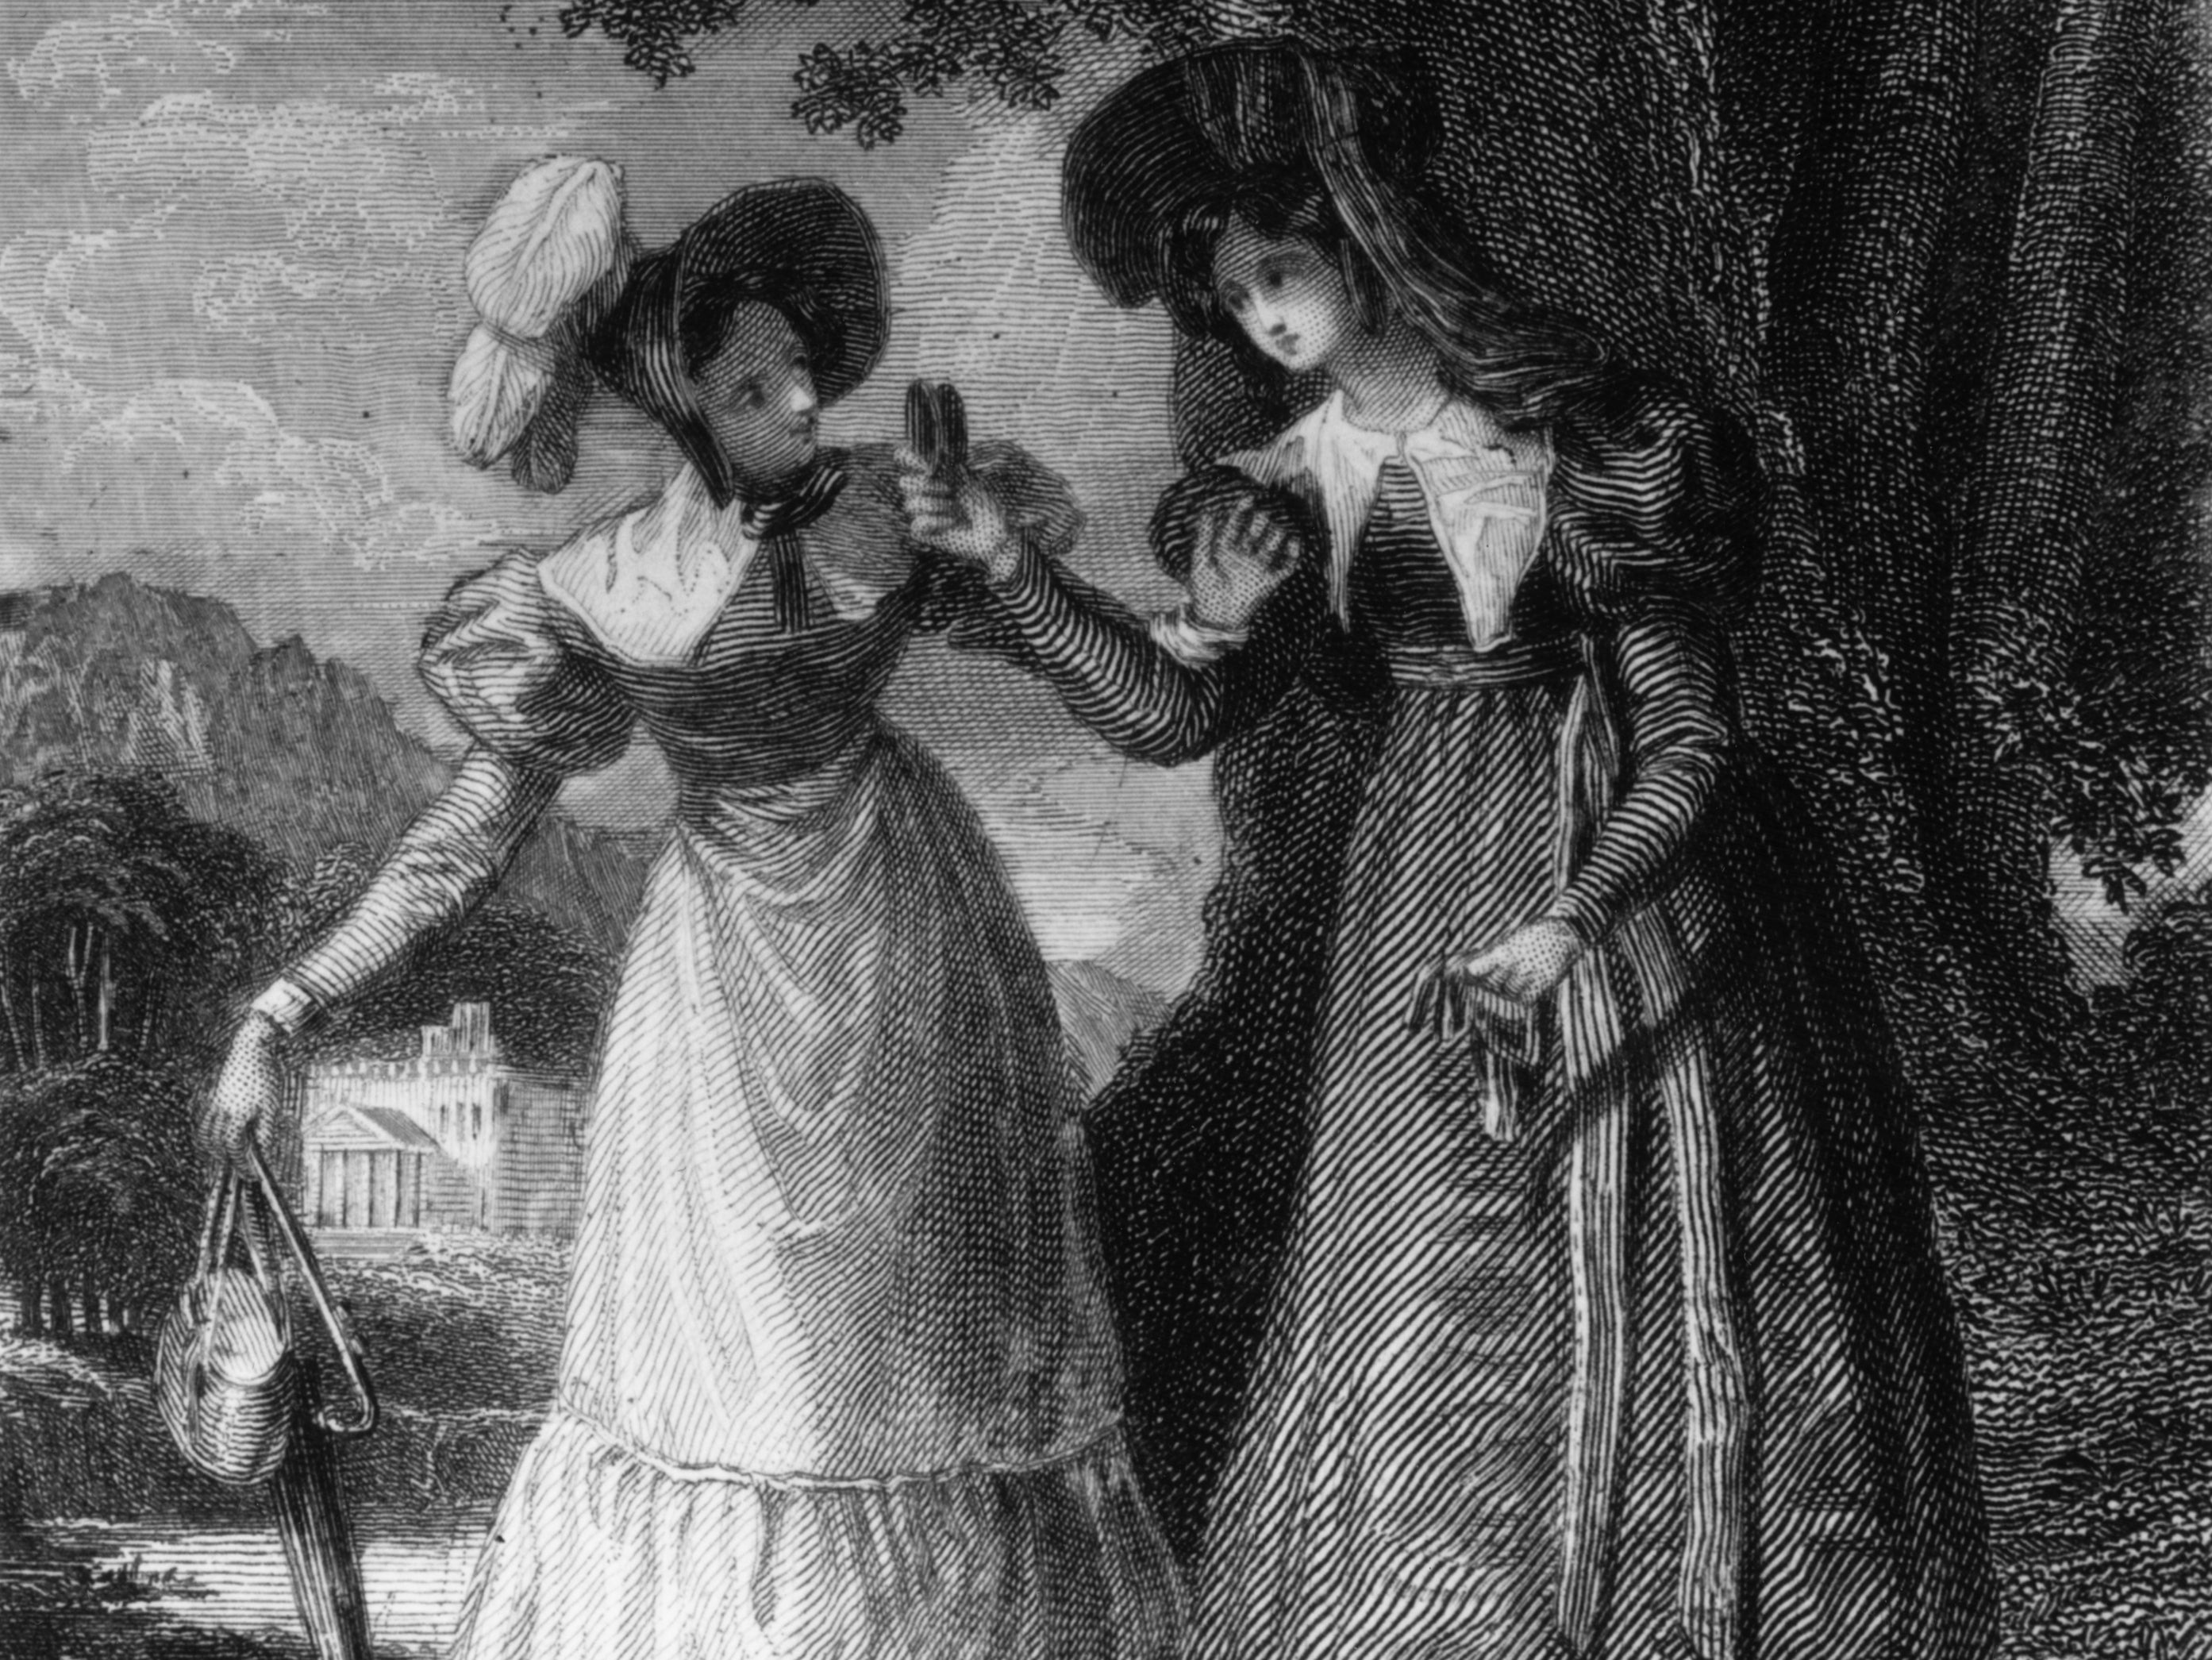 Elinor Dashwood talking to Lucy Steele in a scene from Jane Austen’s ‘Sense And Sensibility’